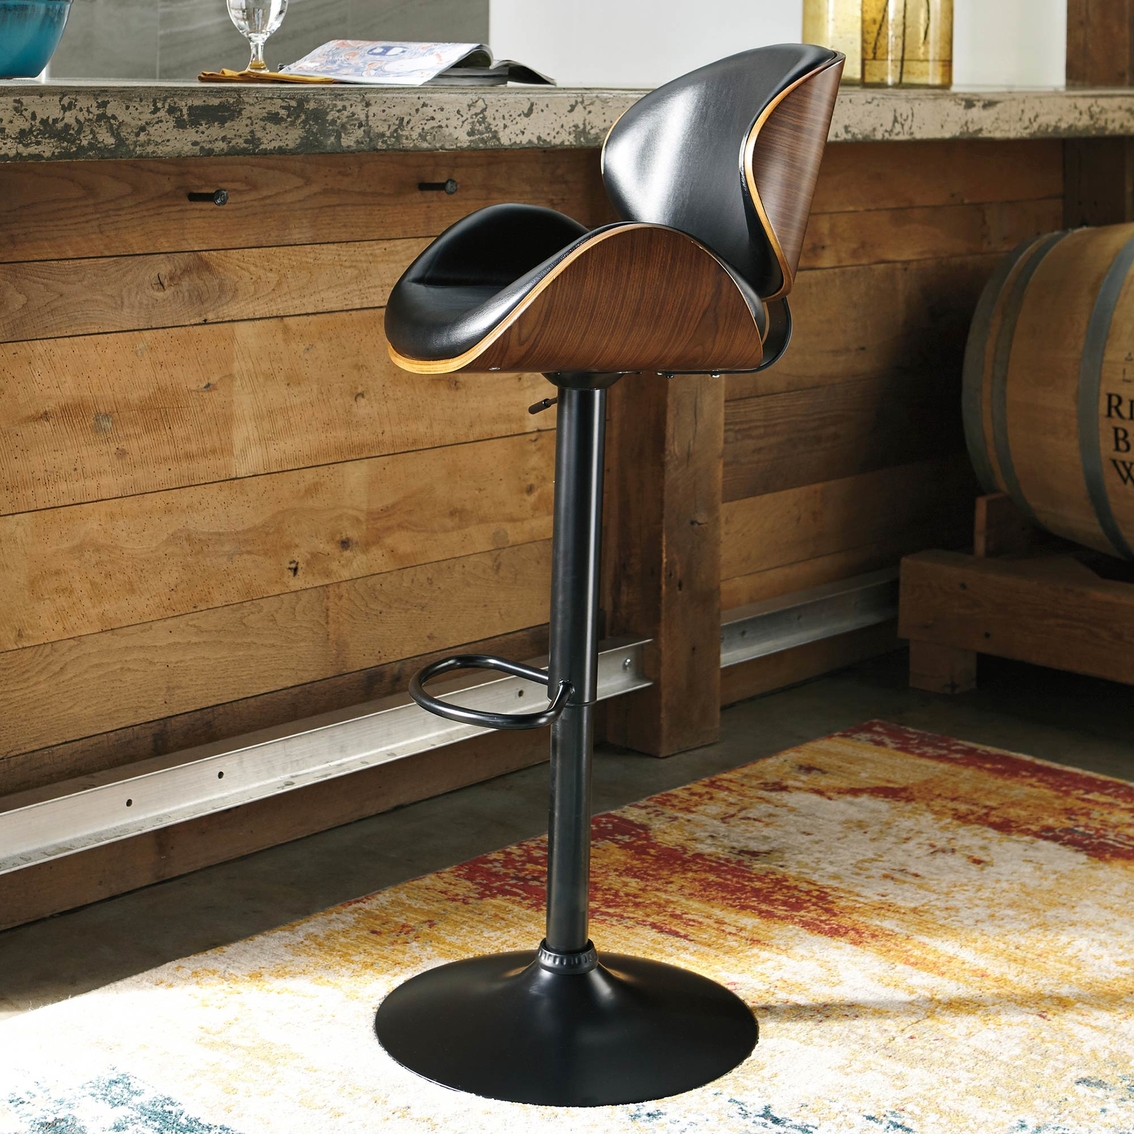 Signature Design by Ashley Adjustable Height Swivel Bar Stool with Scoop Seat - Image 3 of 4